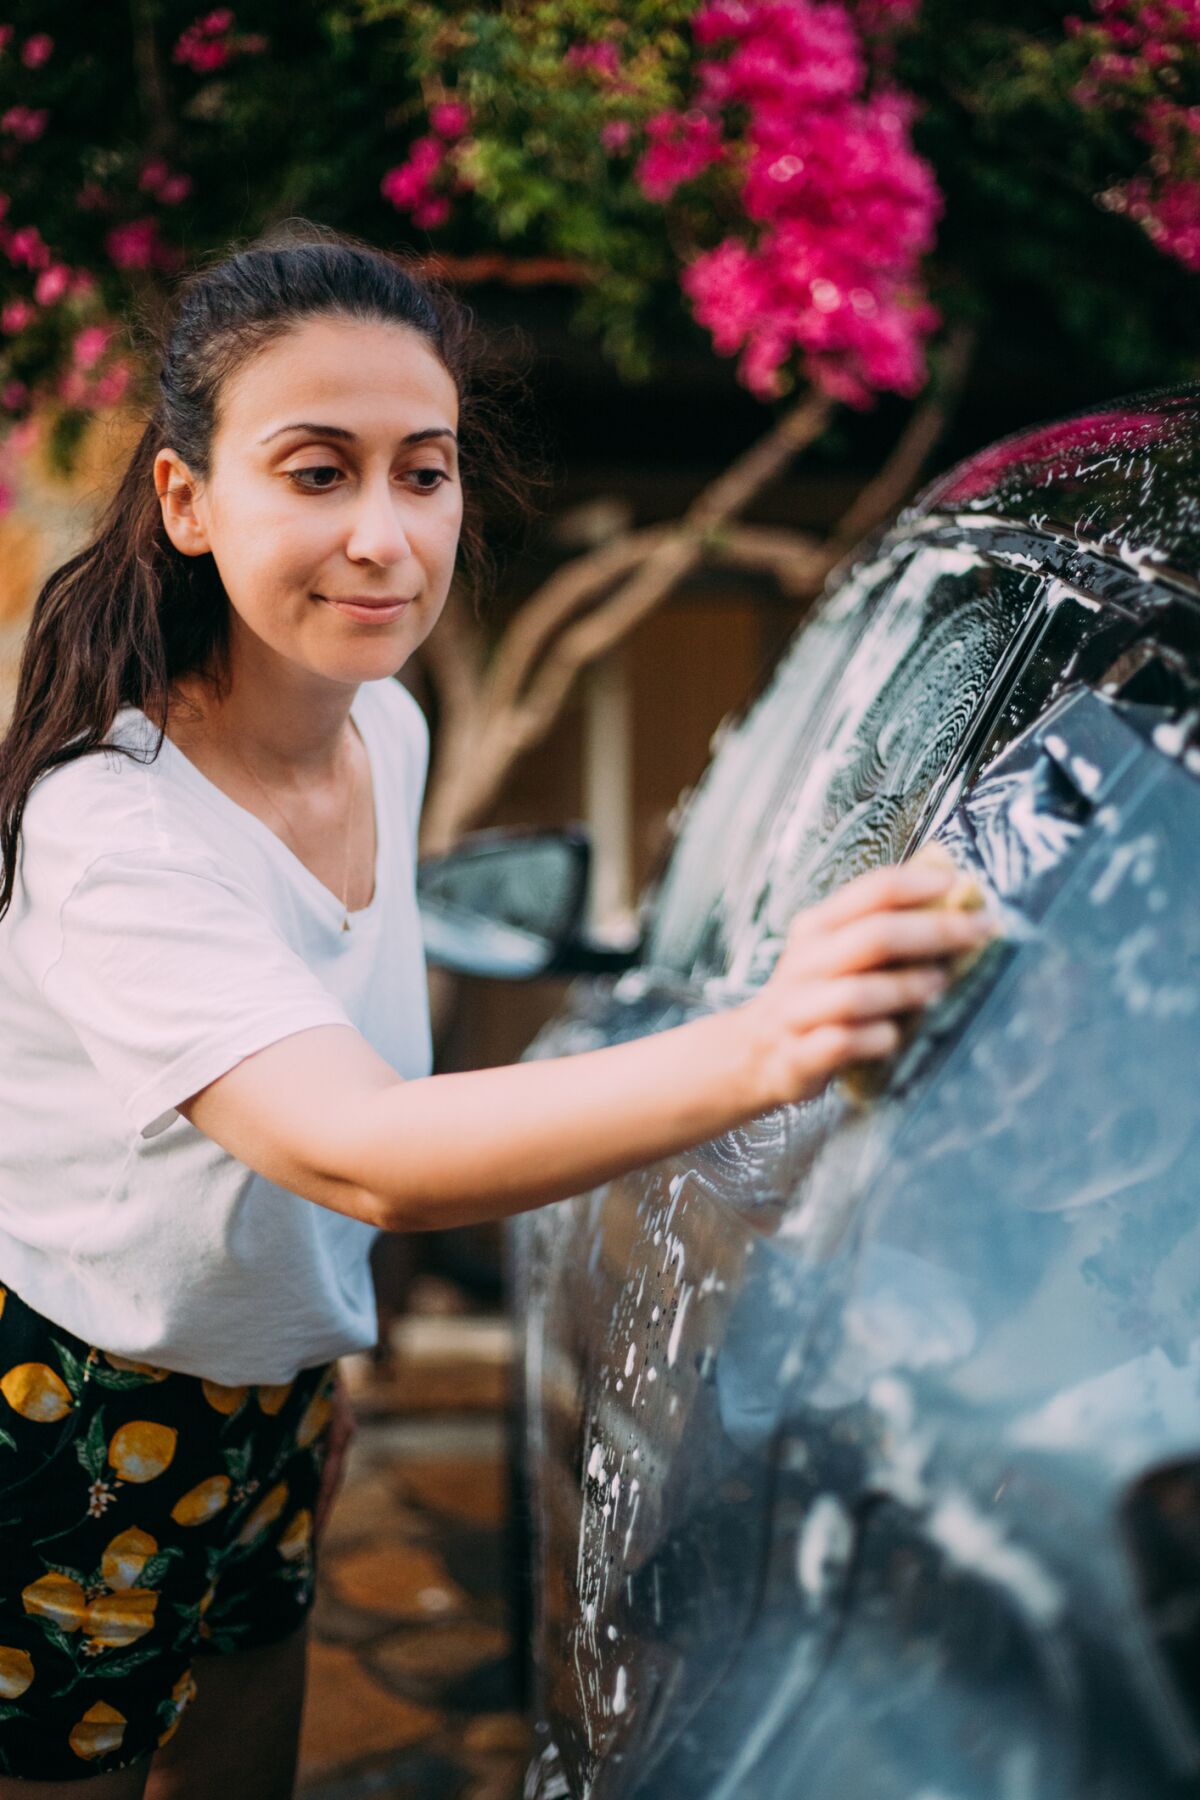 Professional car washes are best, but if you wash at home, use biodegradable soaps and wash your car on a permeable surface.